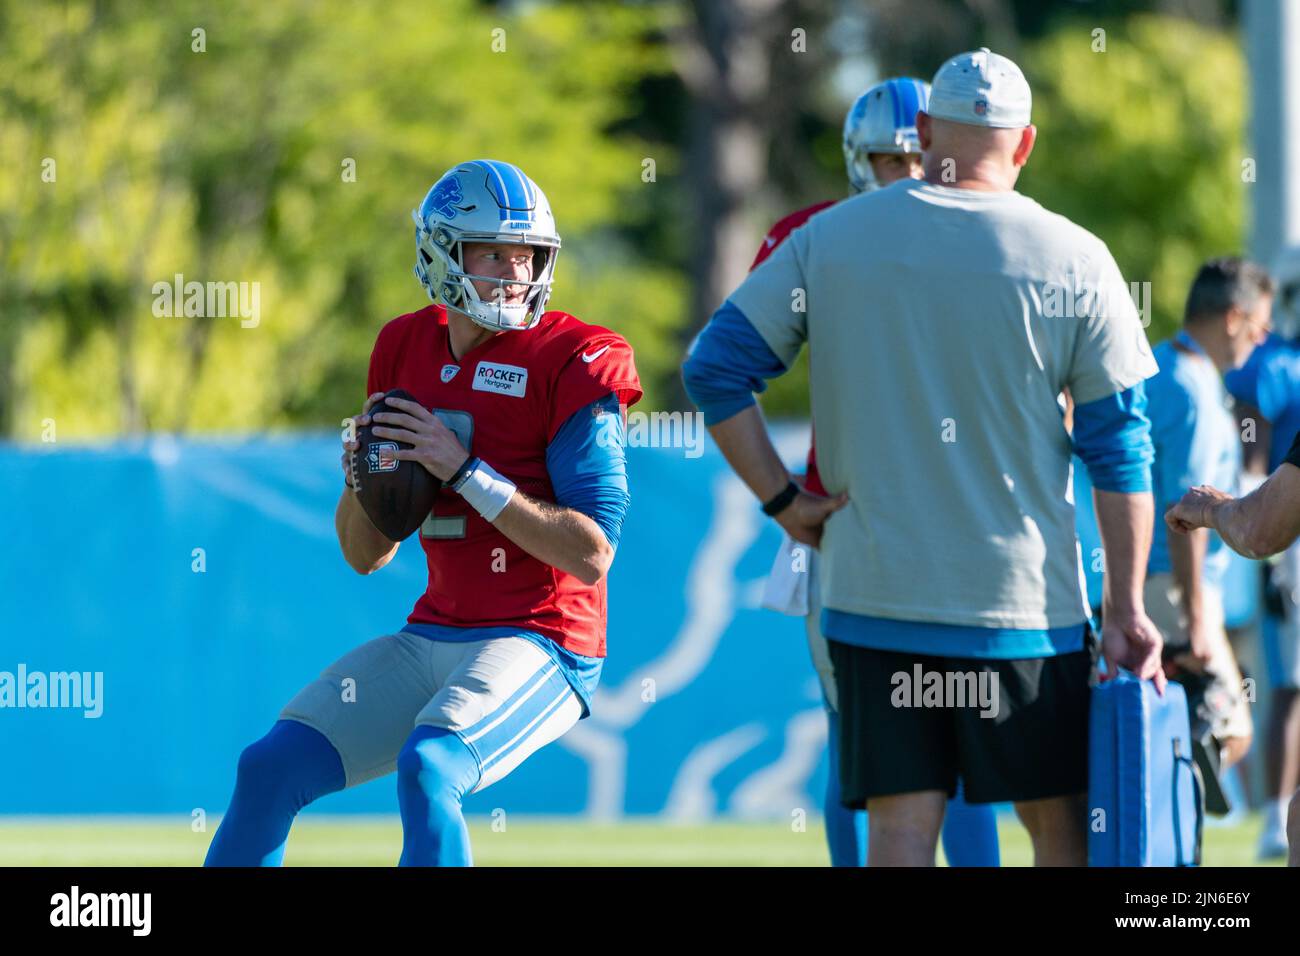 ALLEN PARK, MI - AUGUST 09: Detroit Lions QB Tim Boyle (12) during Lions training camp on August 9, 2022 at Detroiit Lions Training Facility in Allen Park, MI (Photo by Allan Dranberg/CSM) Credit: Cal Sport Media/Alamy Live News Stock Photo